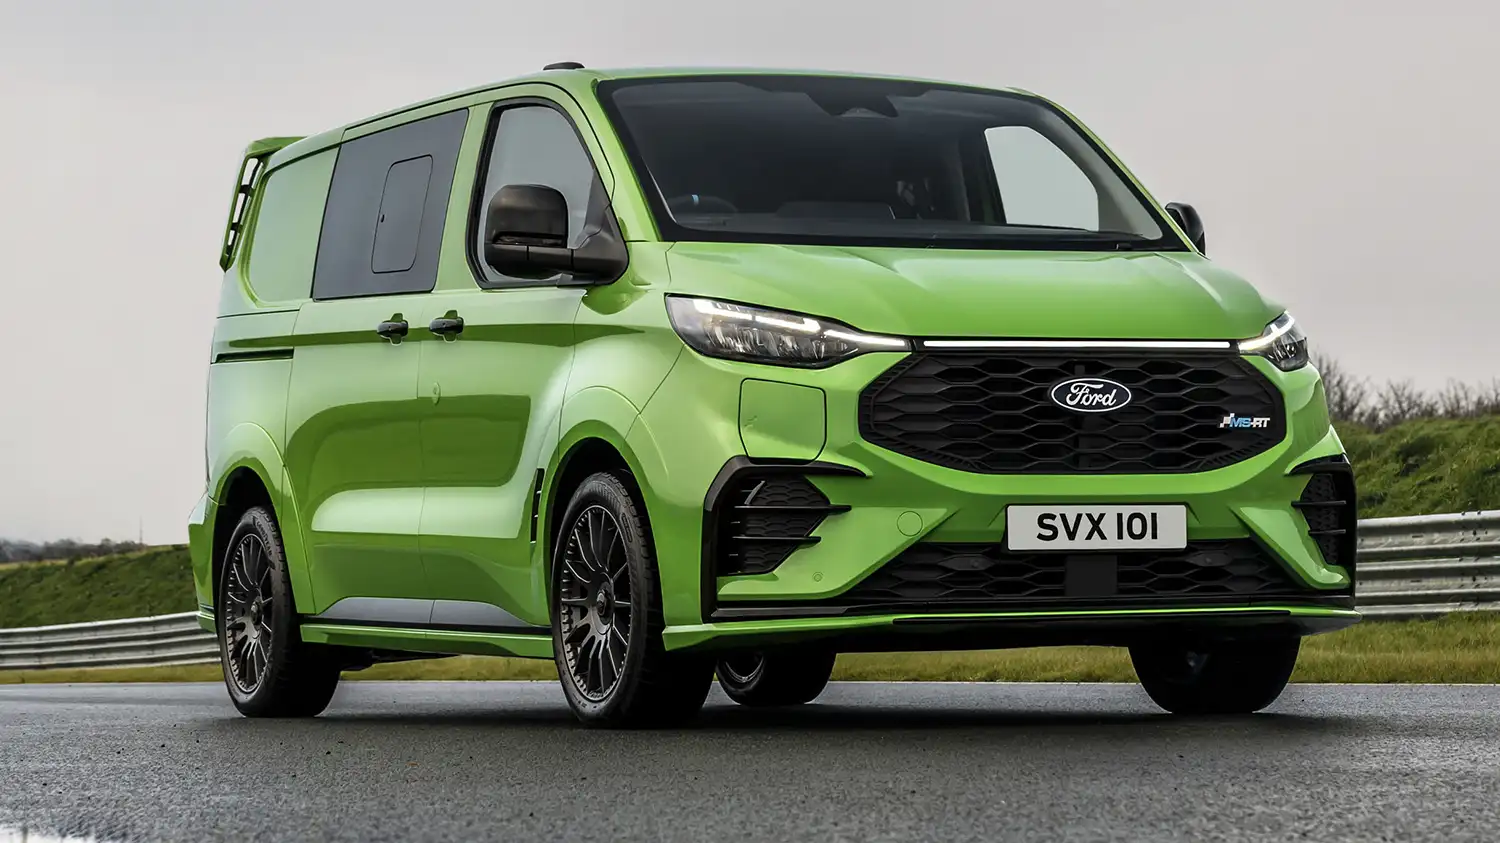 New 2024 Ford Transit revealed with more tech and digital features